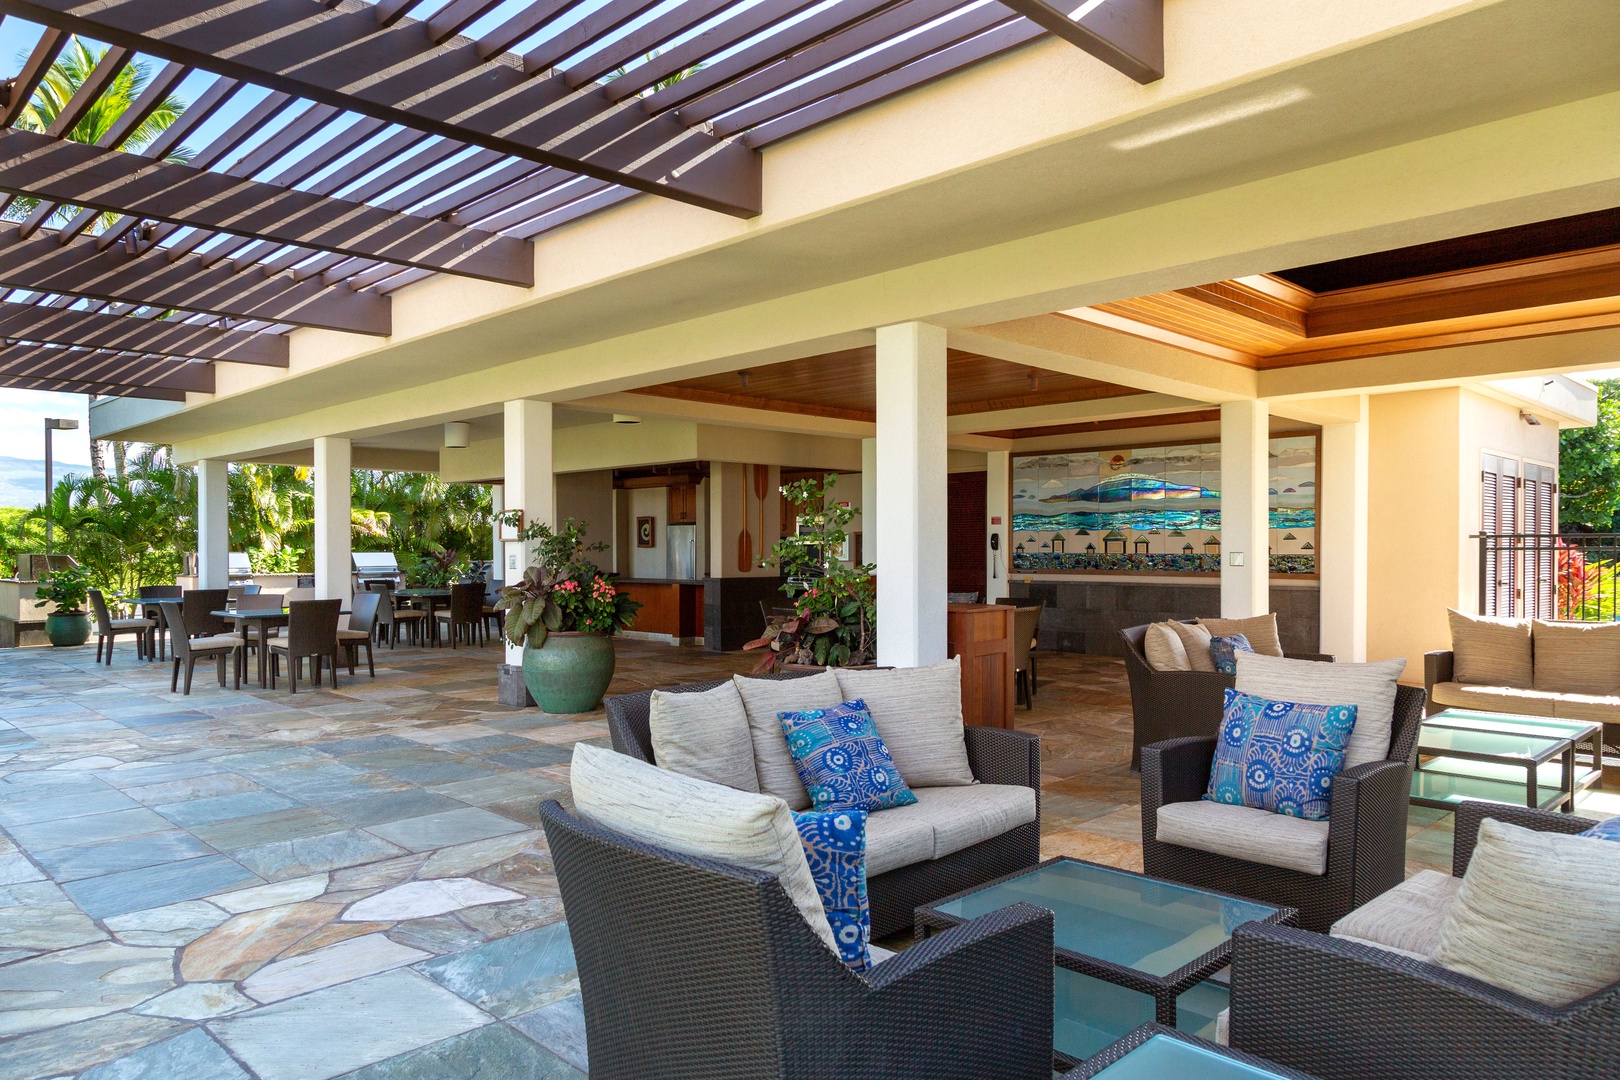 Kamuela Vacation Rentals, Mauna Lani Point E105 - Enjoy BBQ's, a kitchen area and loung areas too at the clubhouse.